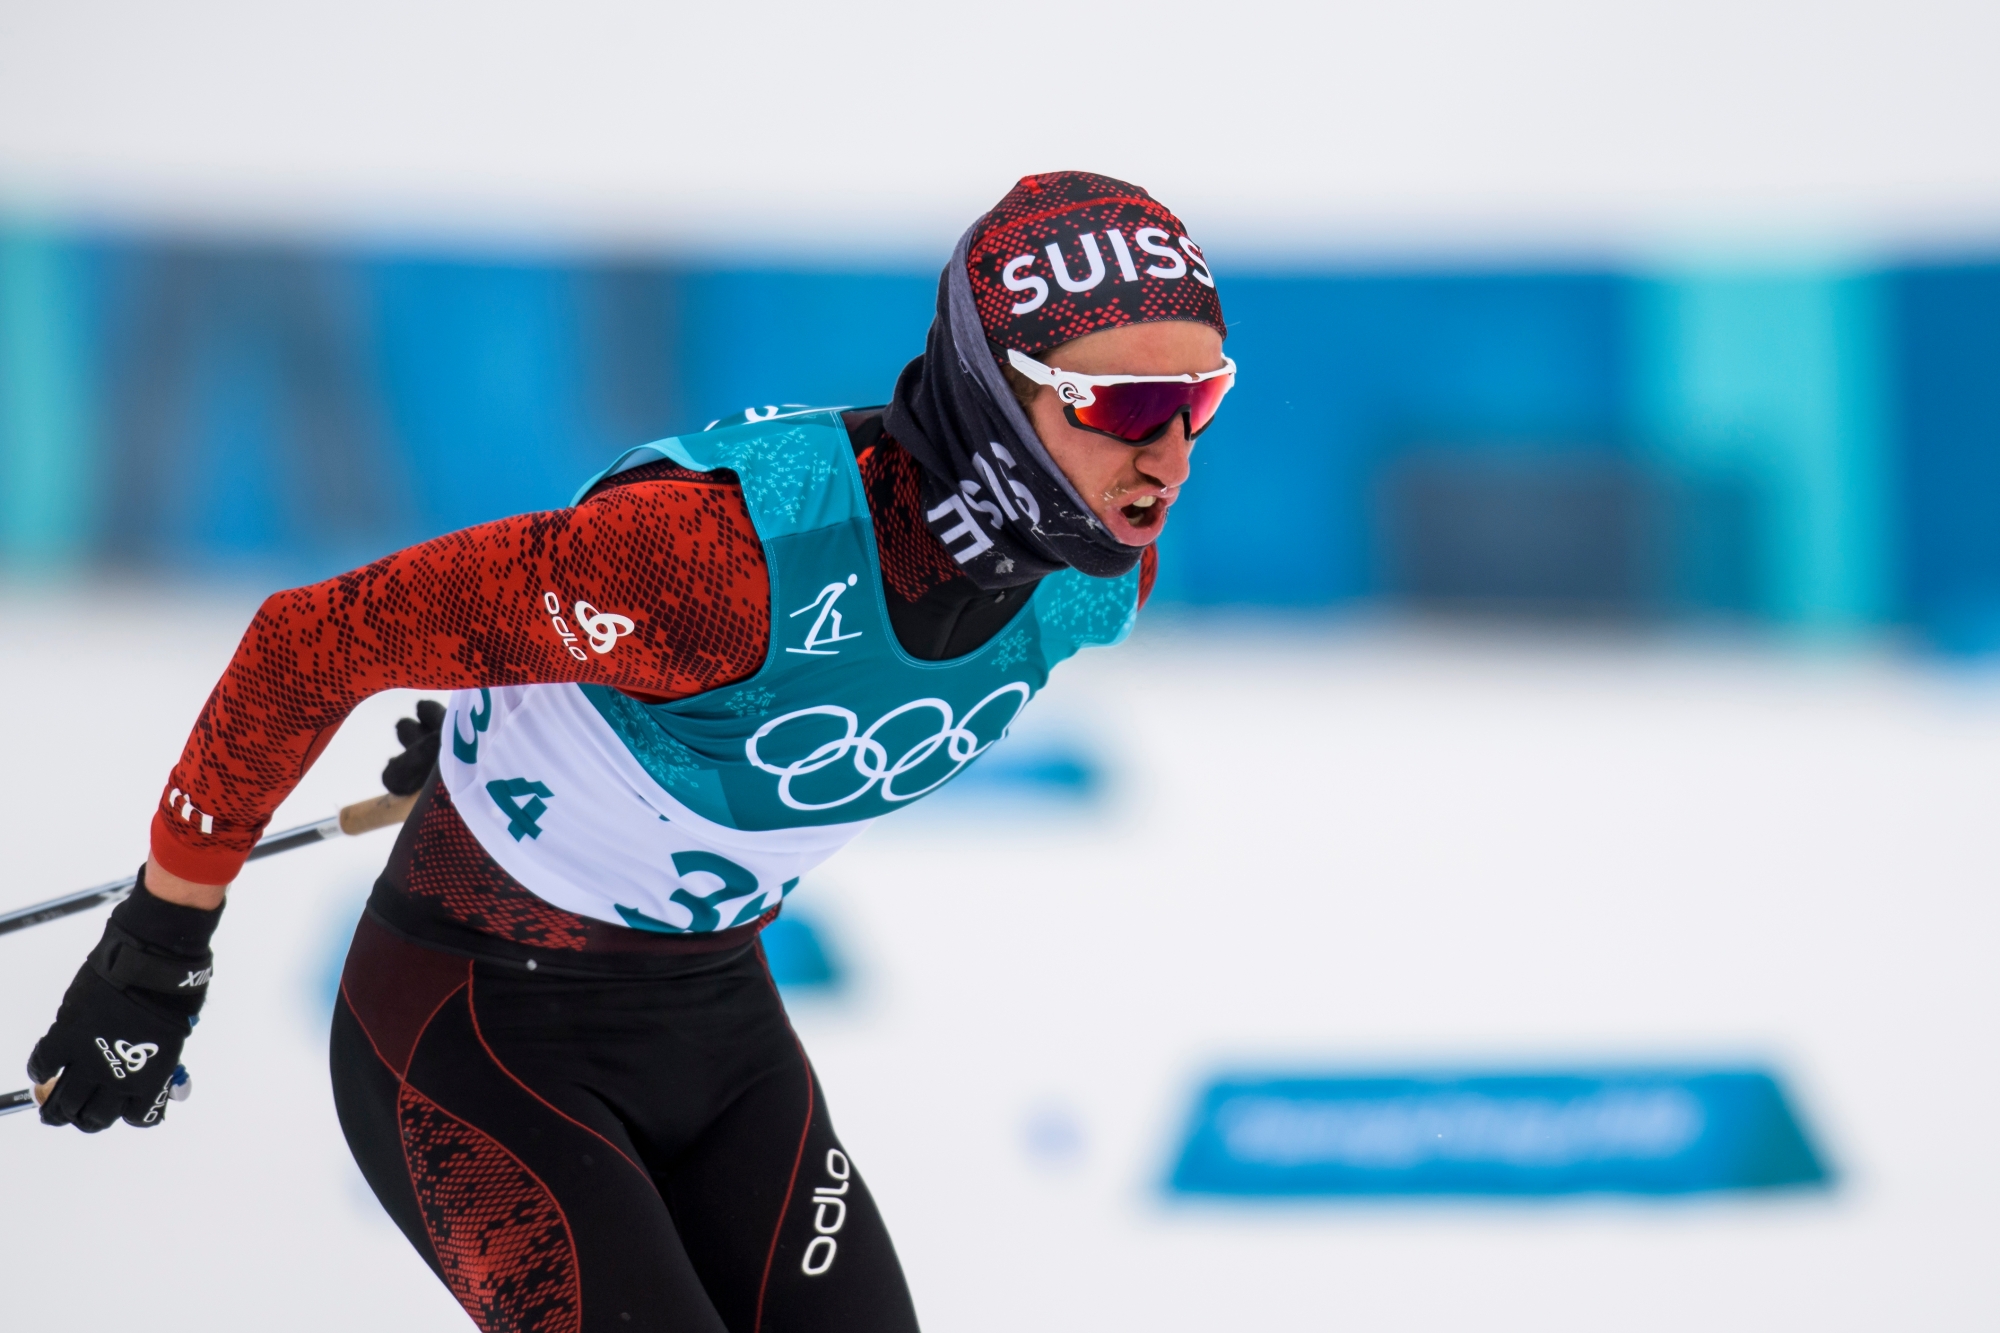 Candide Pralong of Switzerland in action during the men Cross Country Skiing 15 km + 15 km Skiathlon during the XXIII Winter Olympics 2018 at the Alpensia Cross-Country Skiing Centre in Pyeongchang, South Korea, on Sunday, February 11, 2018. (KEYSTONE/Jean-Christophe Bott) PYEONGCHANG 2018 CROSS COUNTRY